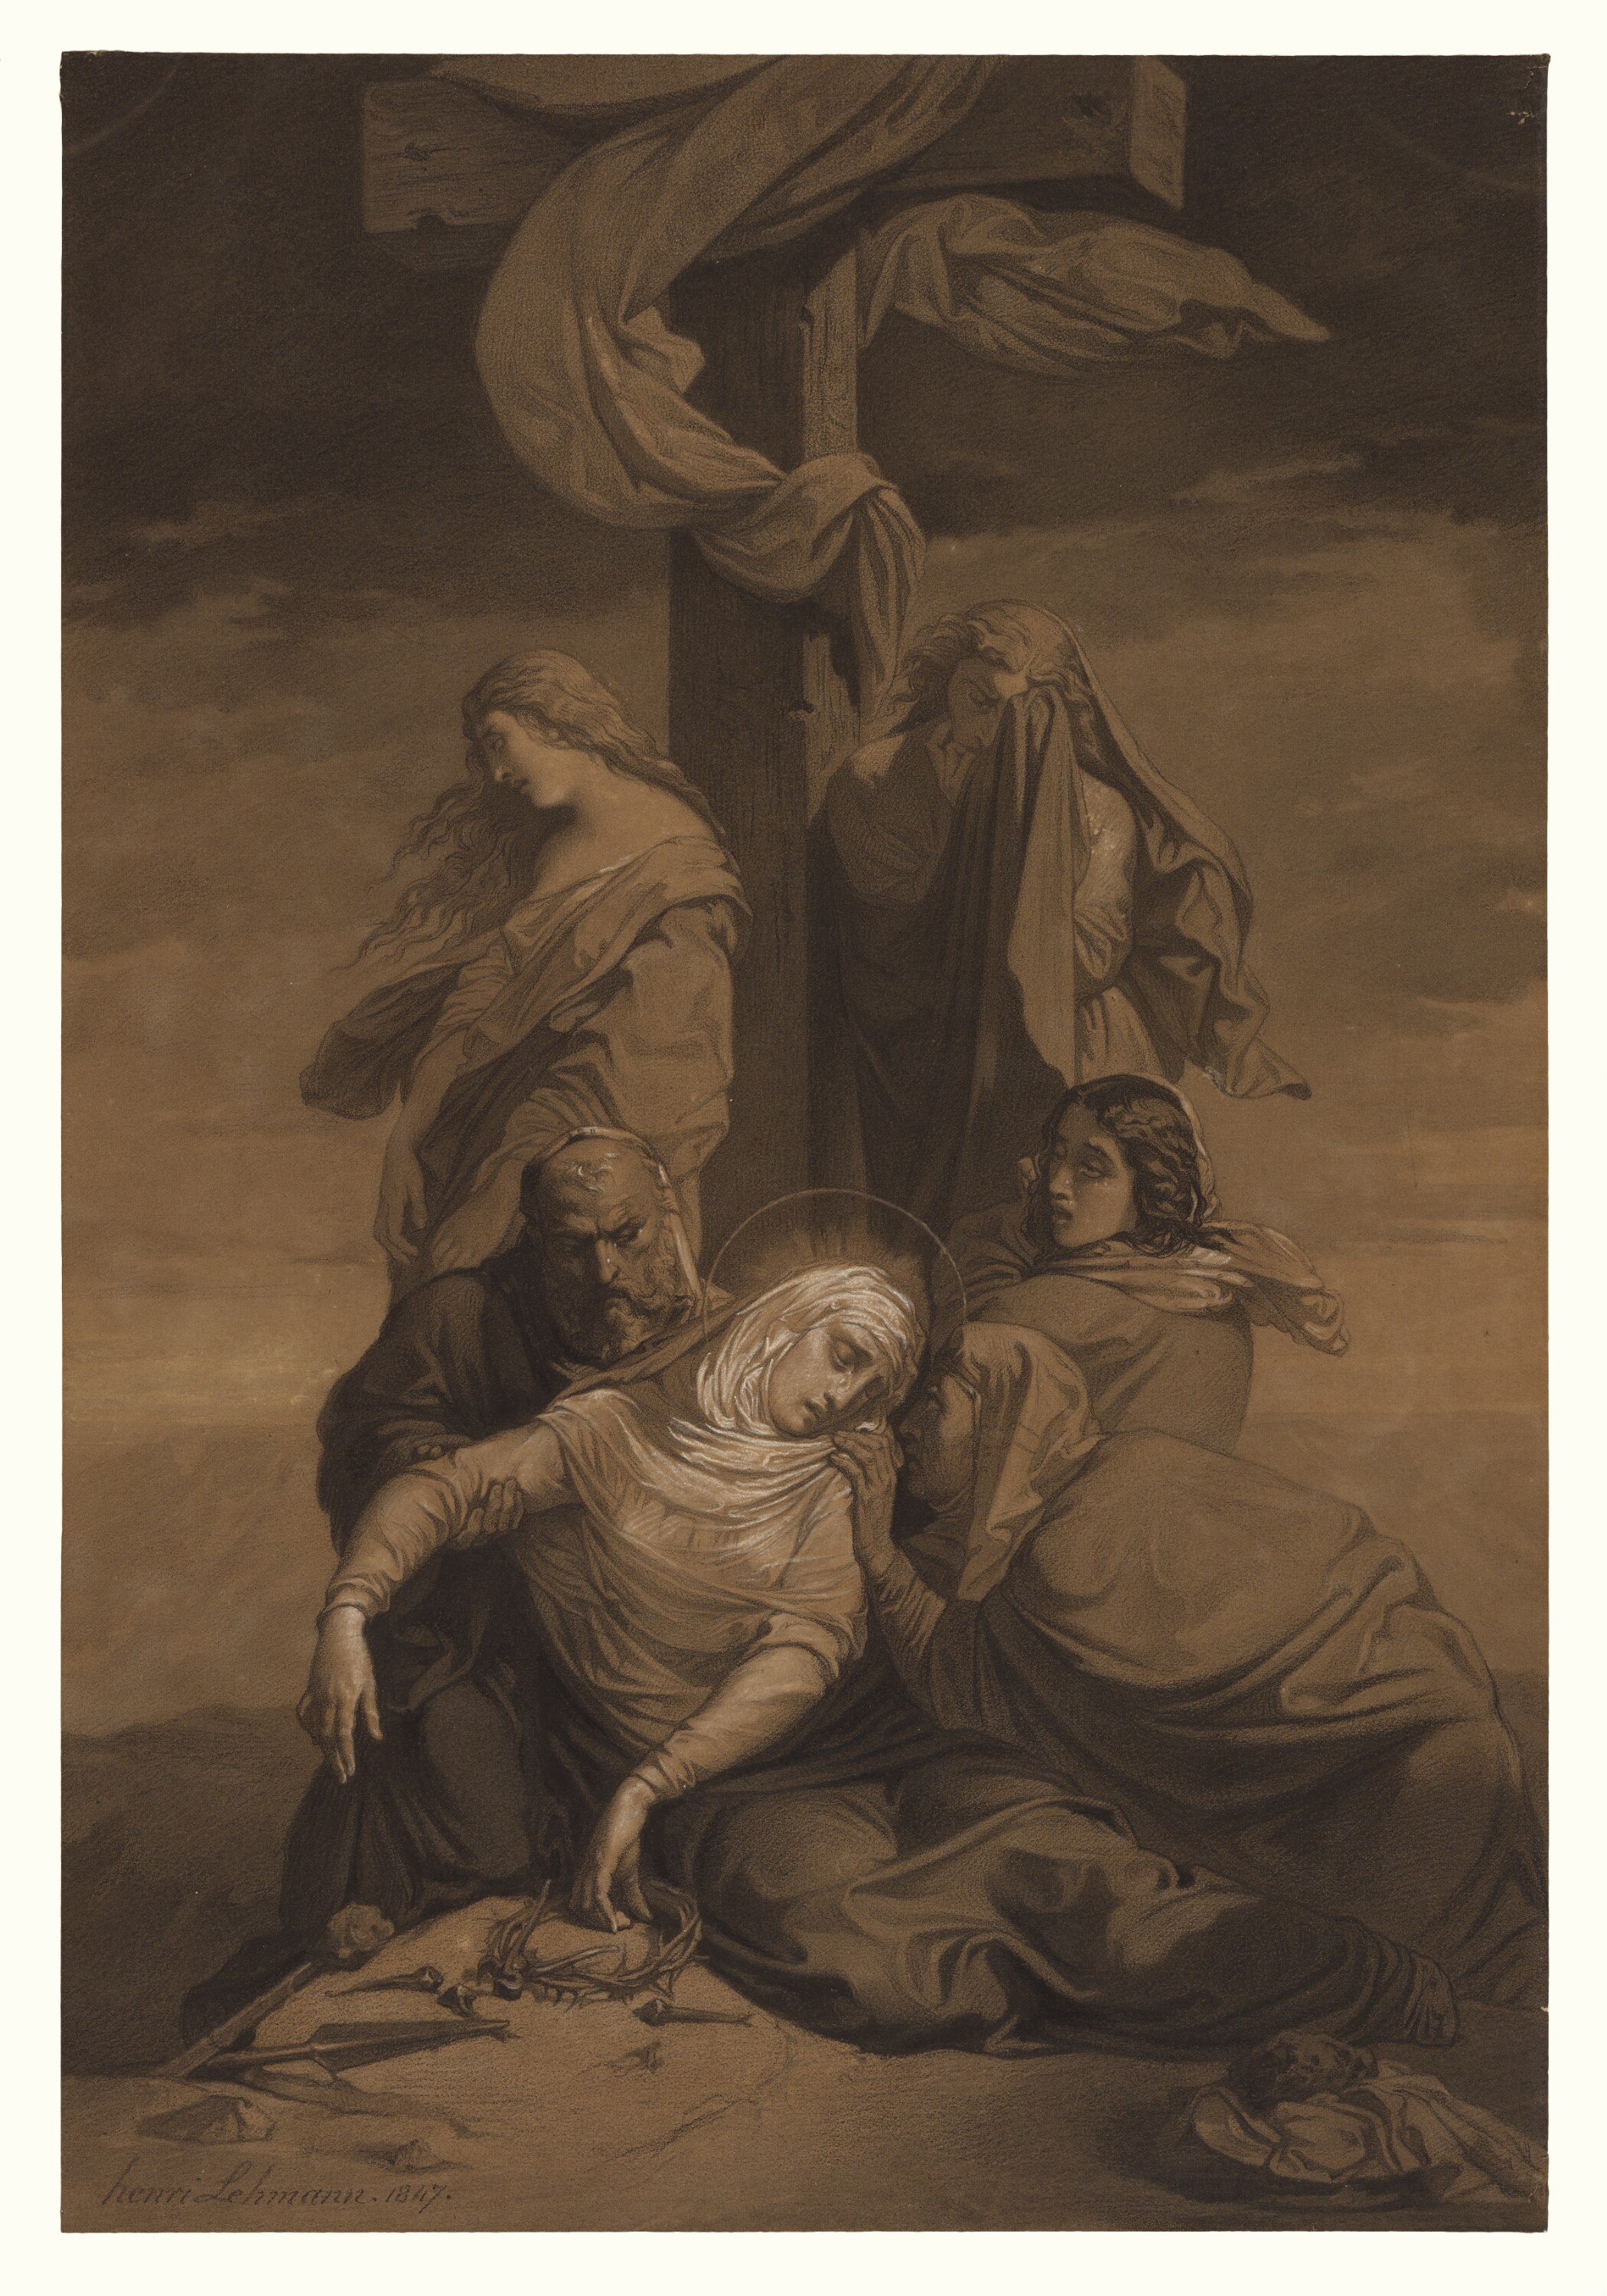 Henri Lehmann--Lamentation at the Foot of the Cross--1847--Getty Museum